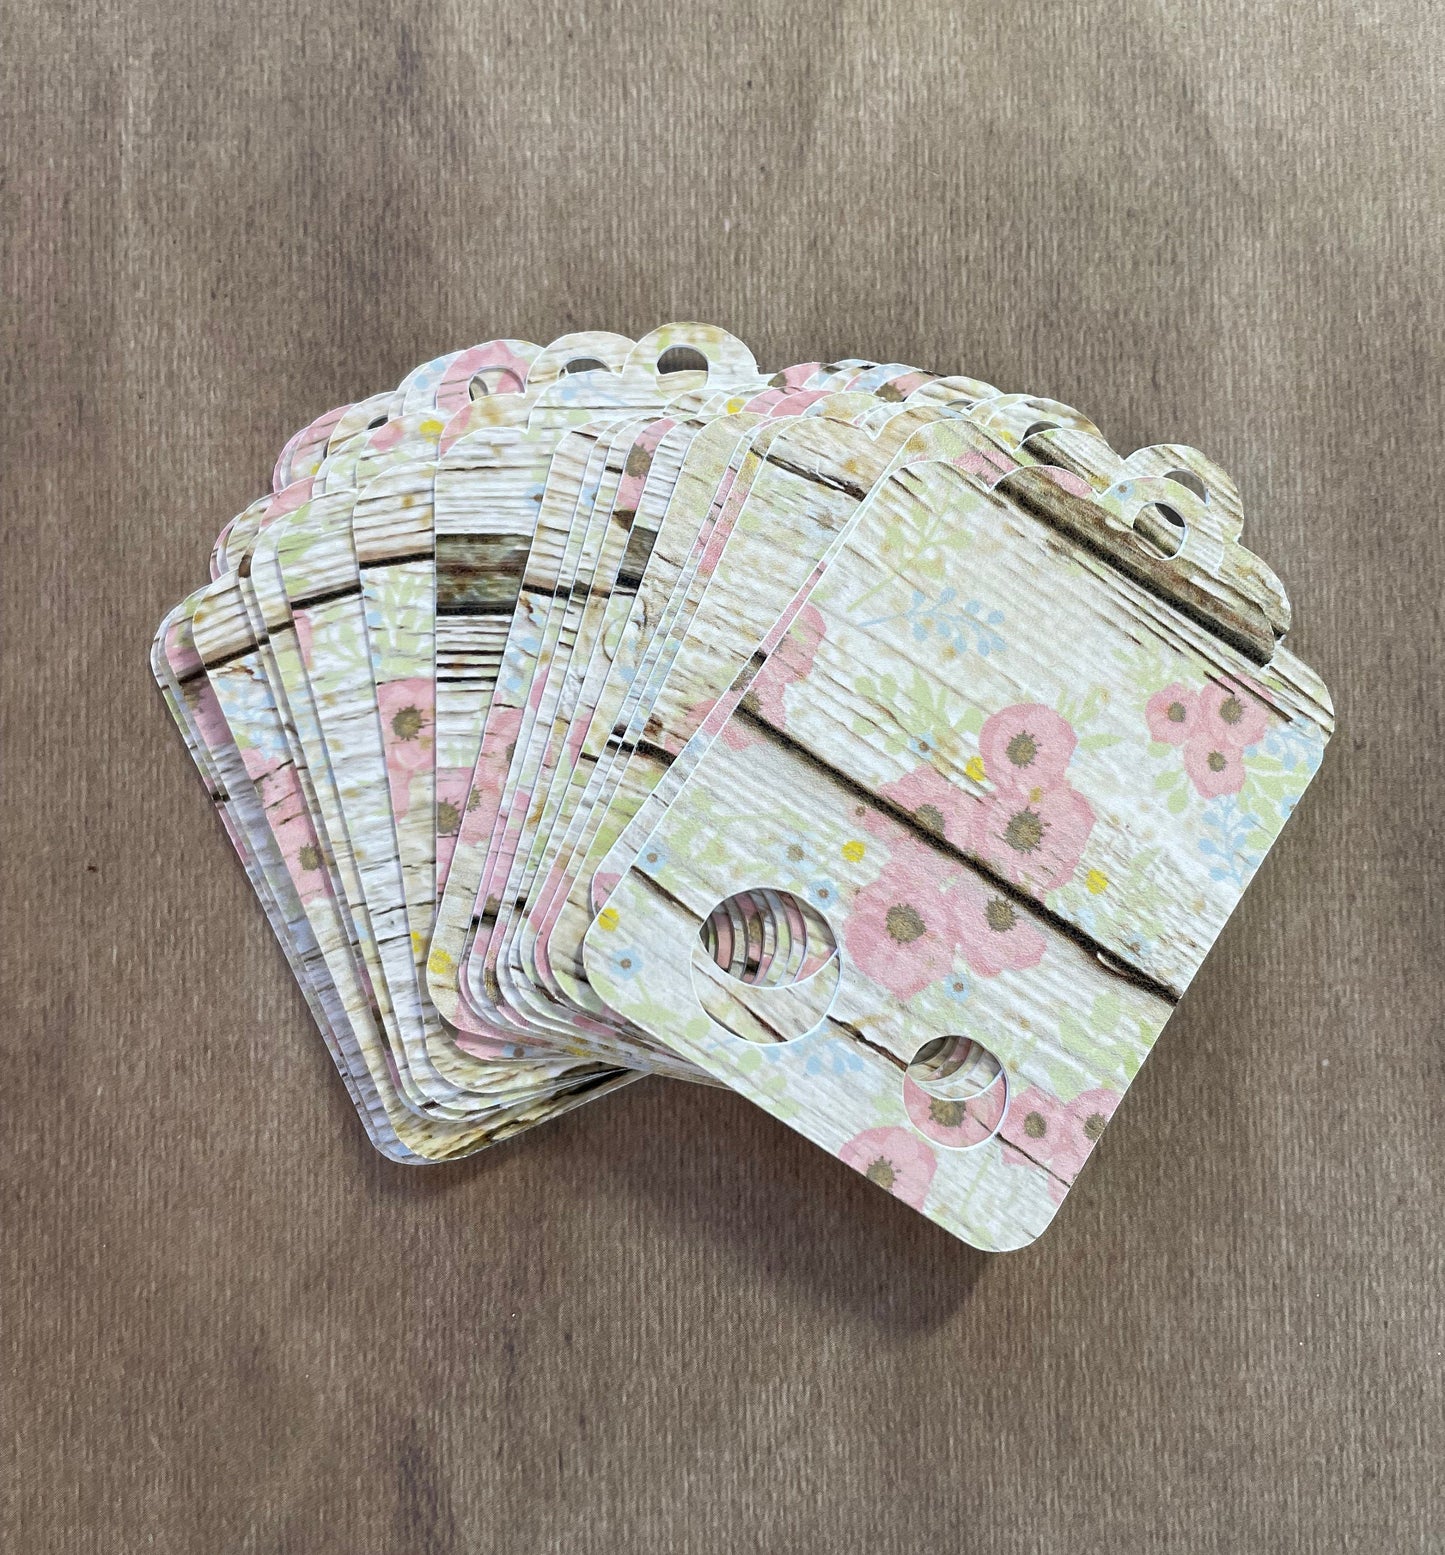 Floss Keepers/Tags -  Vintage Wood with Pink Flowers, Thread & Yarn Organizers, Thread & Yarn Organizers, The Crafty Grimalkin - A Cross Stitch Store